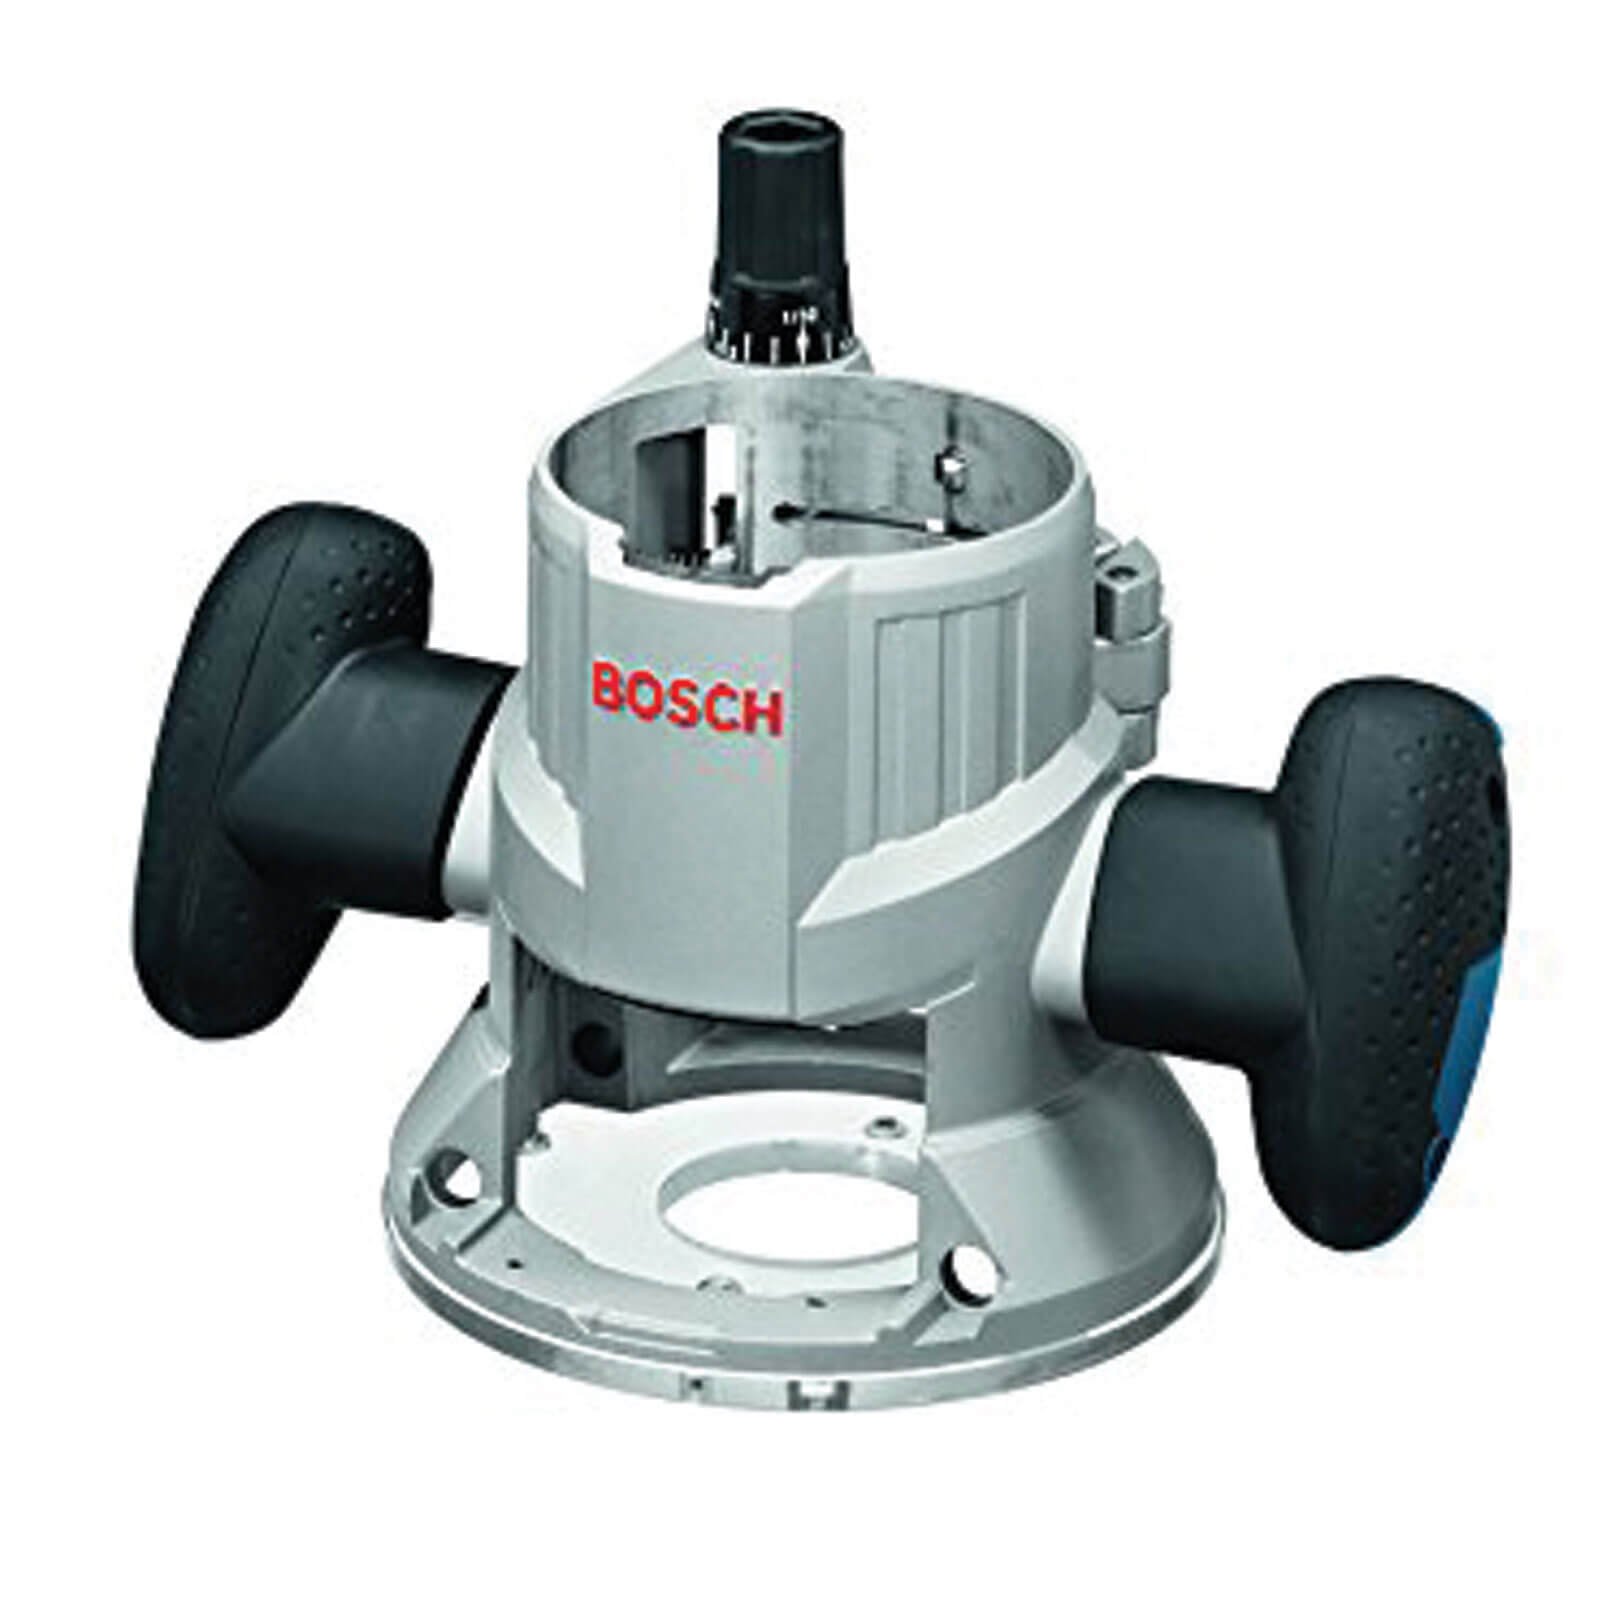 Photo of Bosch Gkf 1600 Compact Fixed Base Router Unit For Gof1600